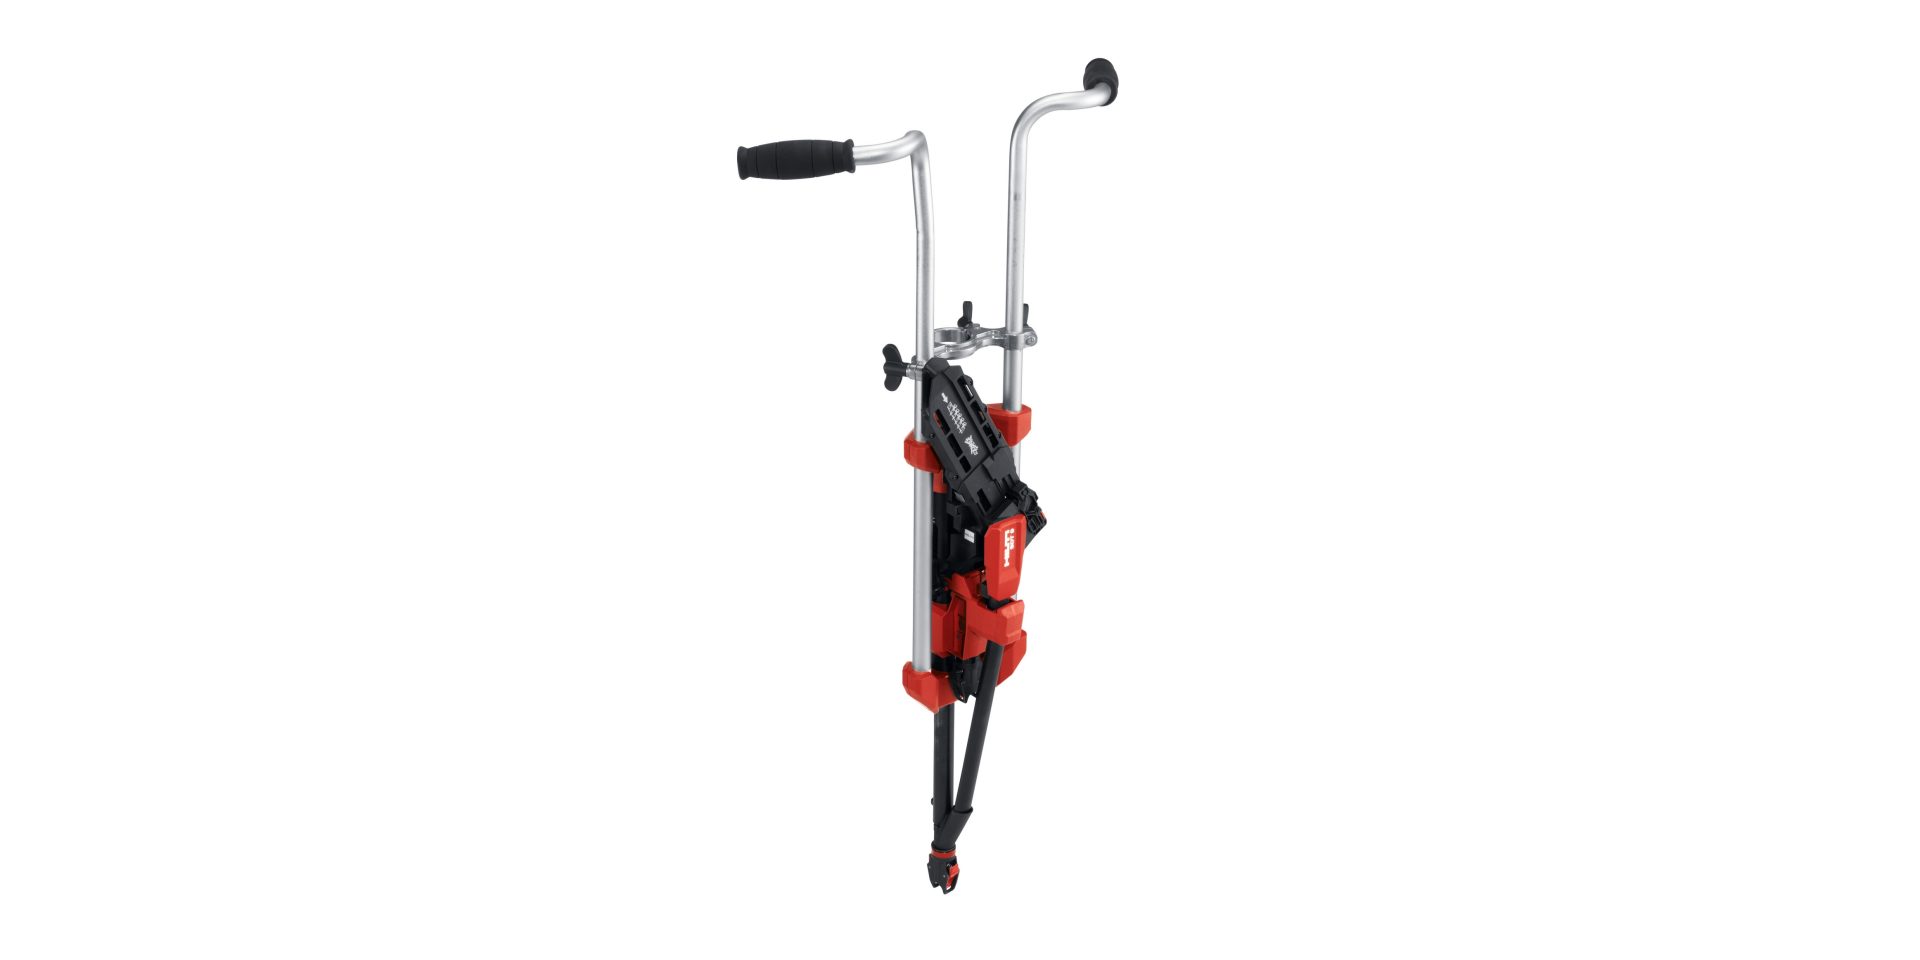 Image of the Hilti SDT 9 Stand-up tool, also known as the Hilti bicycle or pogo stick